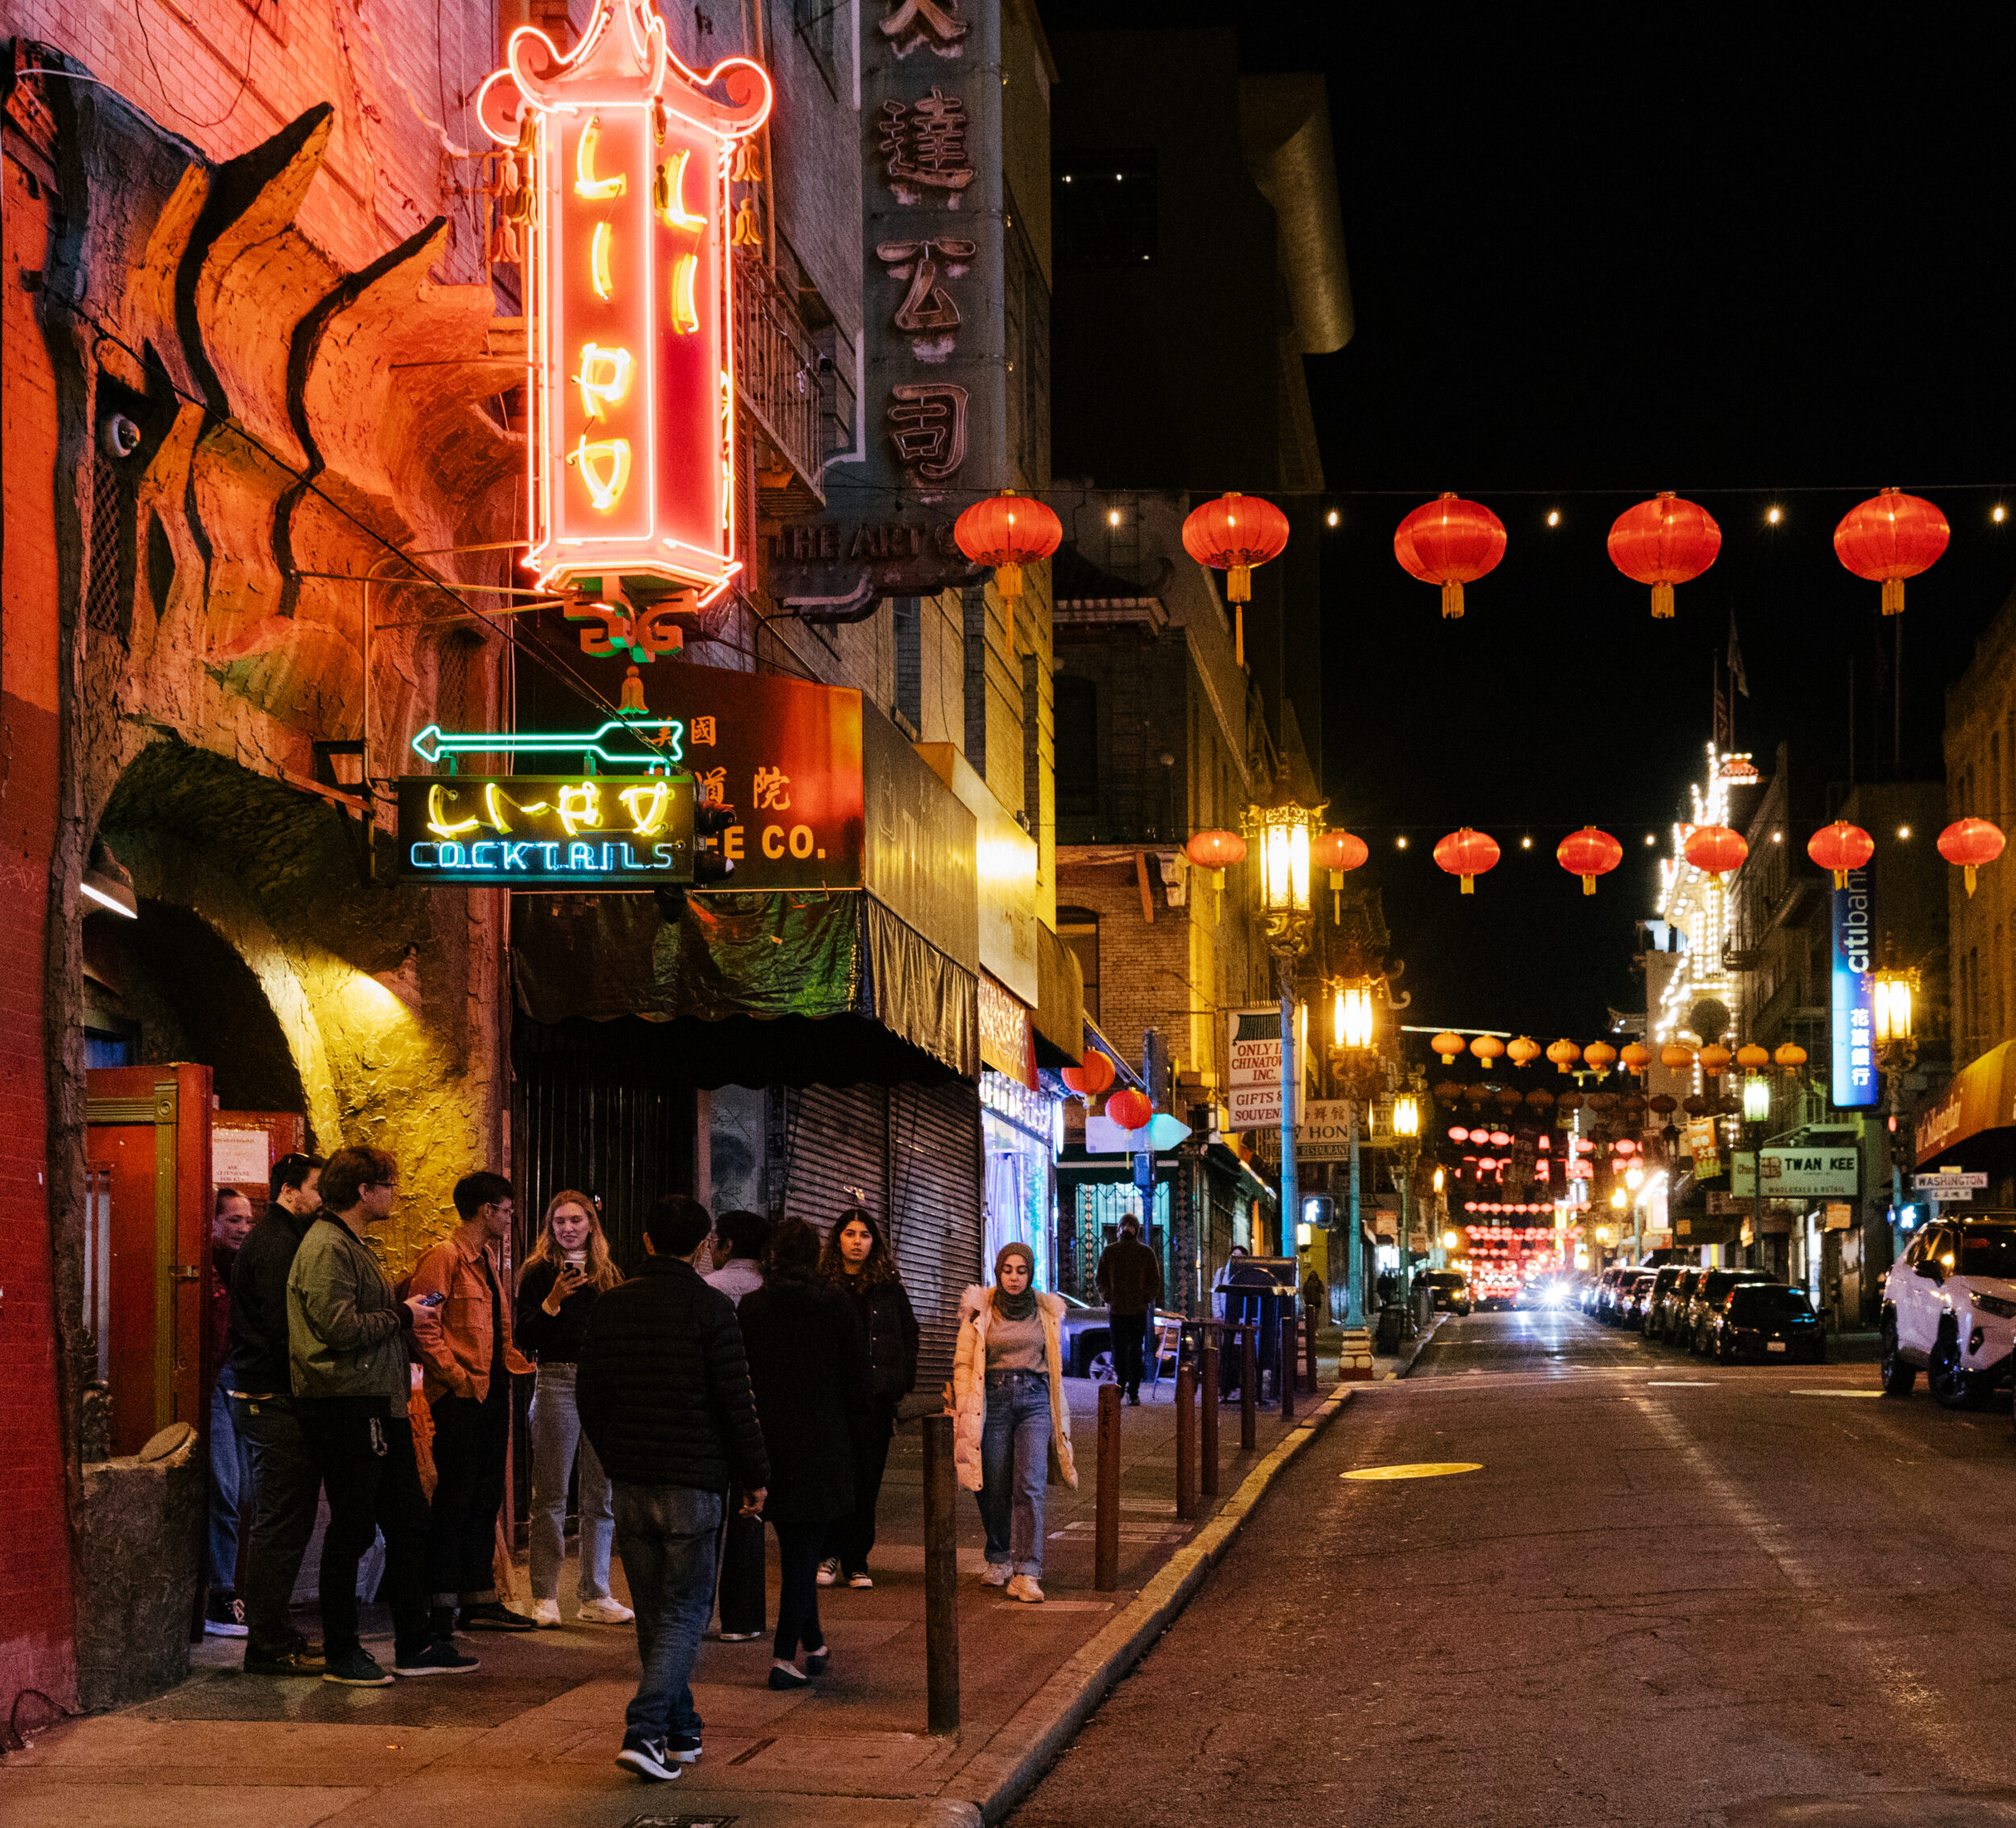 The Li Po loung is lit up with neon on a dark street in San Francisco's Chinatown, where the street is strung with red lanterns.